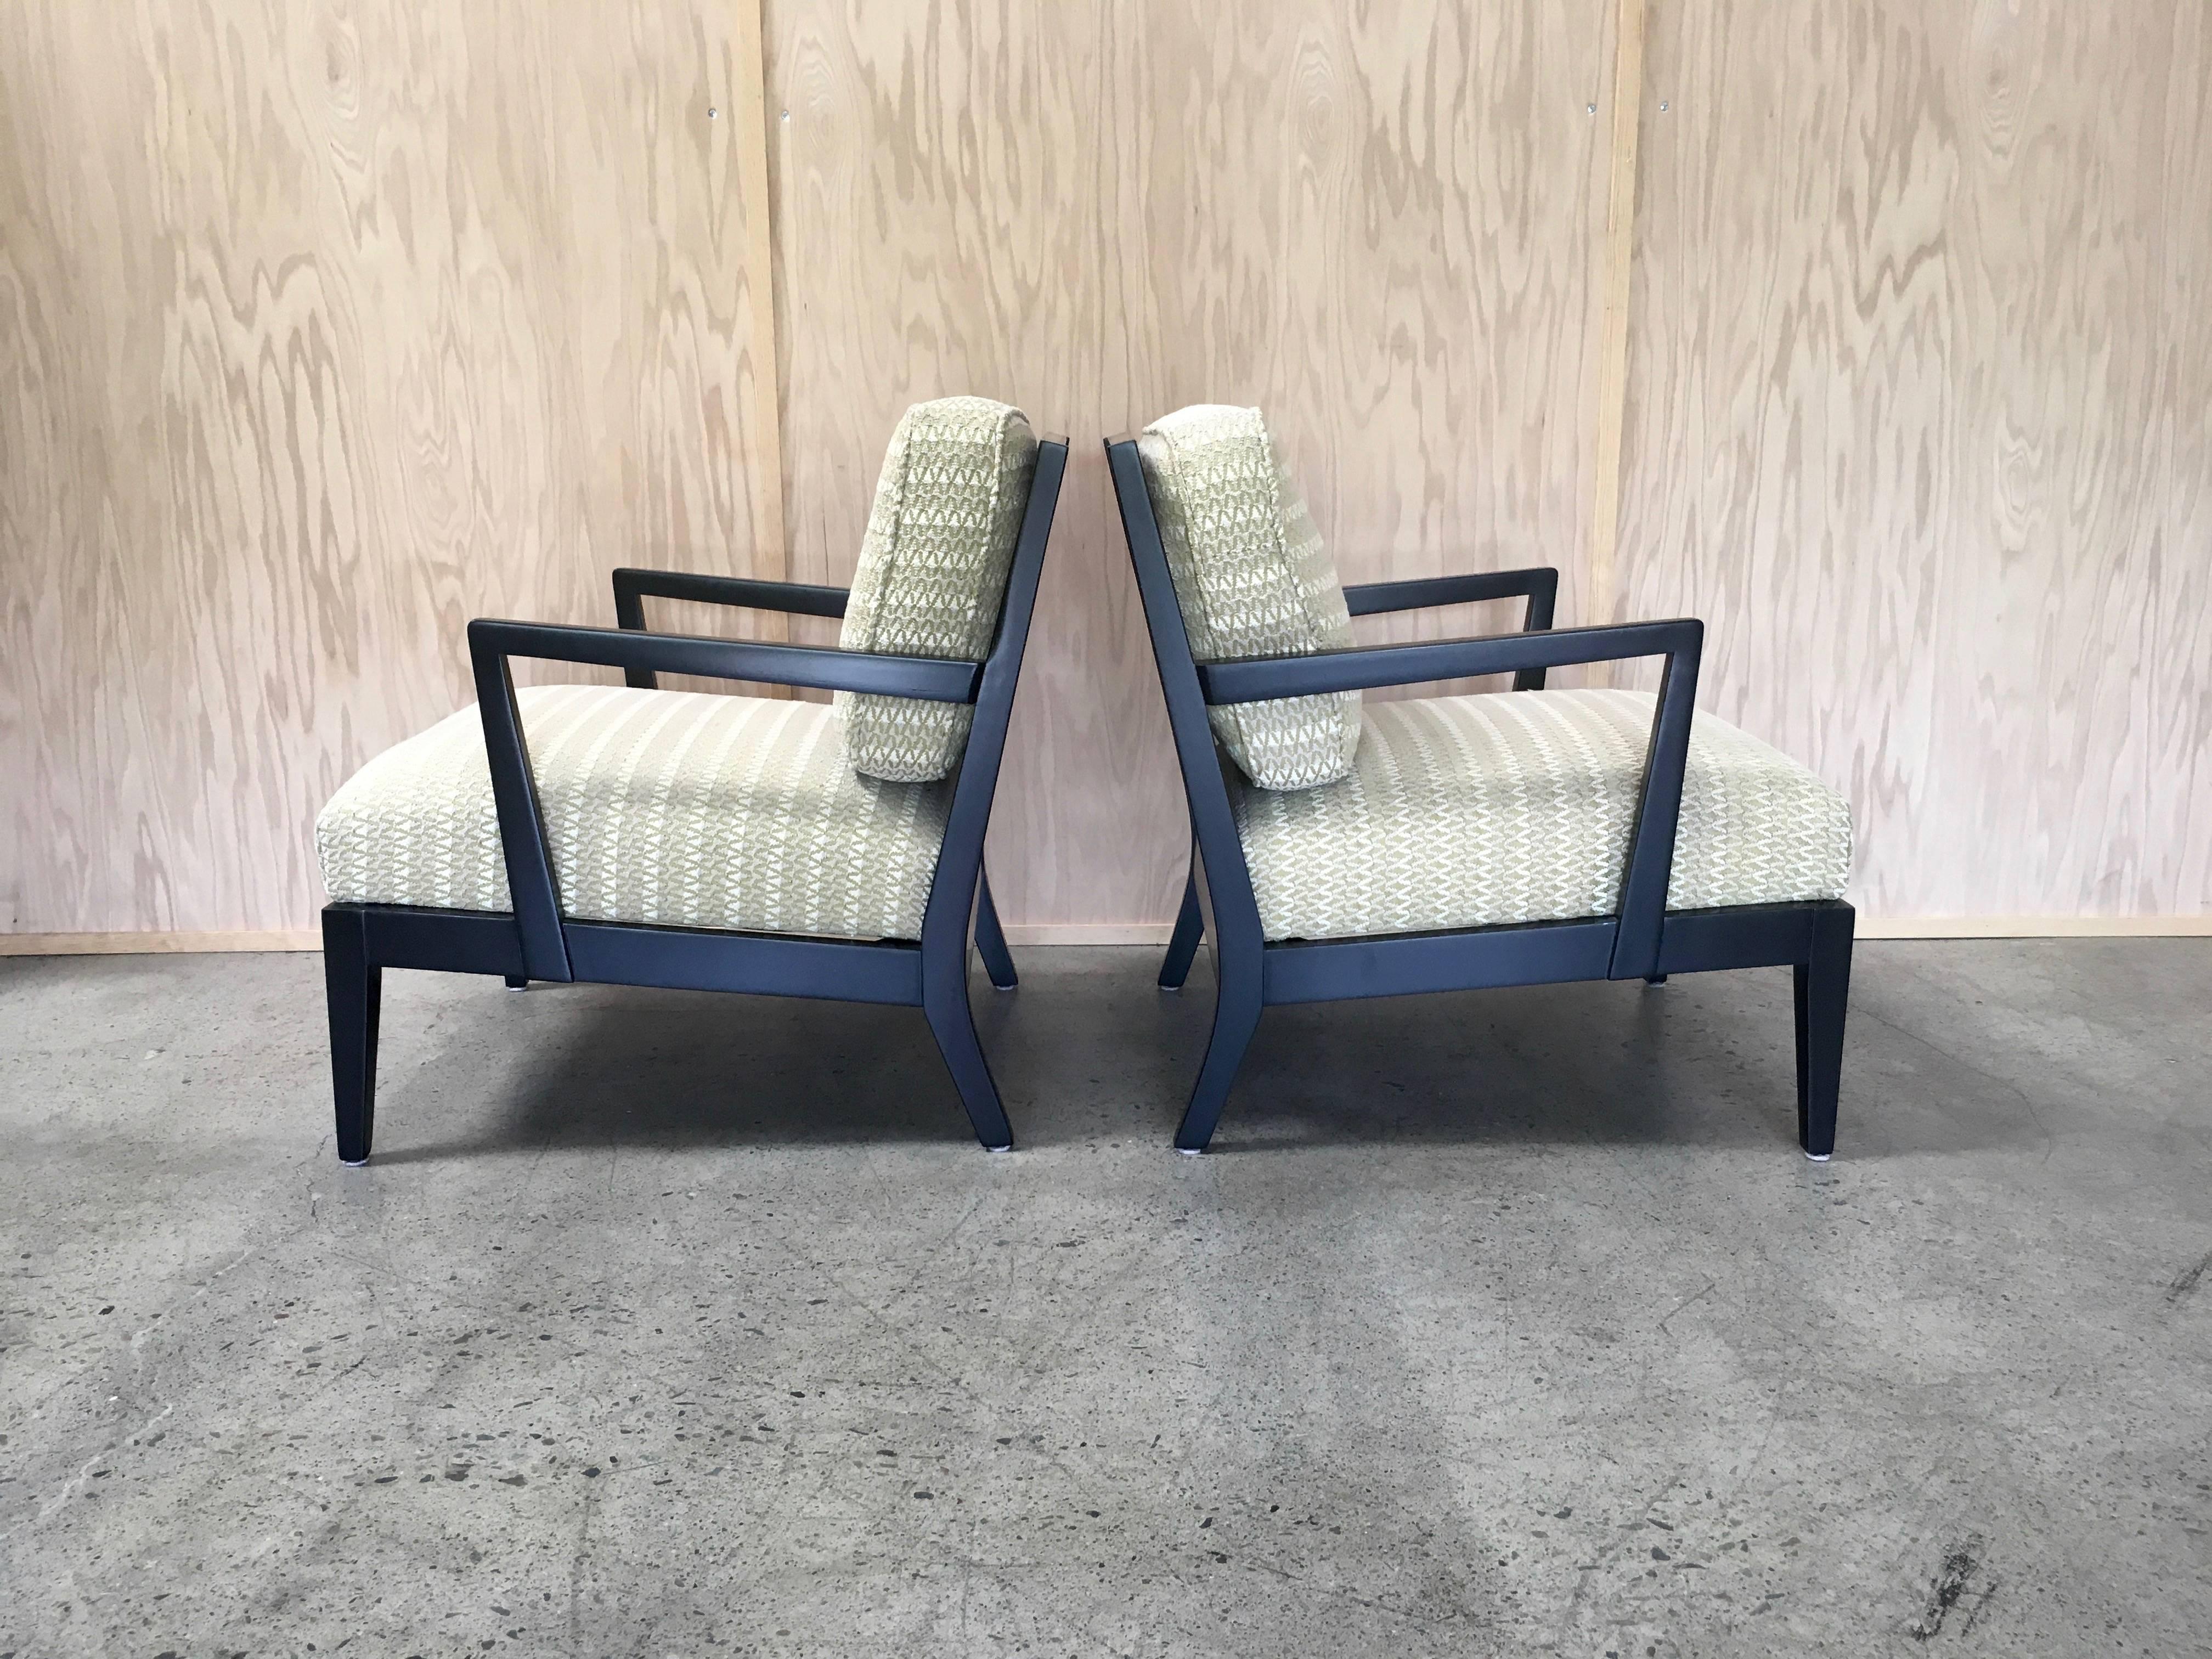 Very much in the style of Bill Haines pair of lounge chairs ebonized finish.